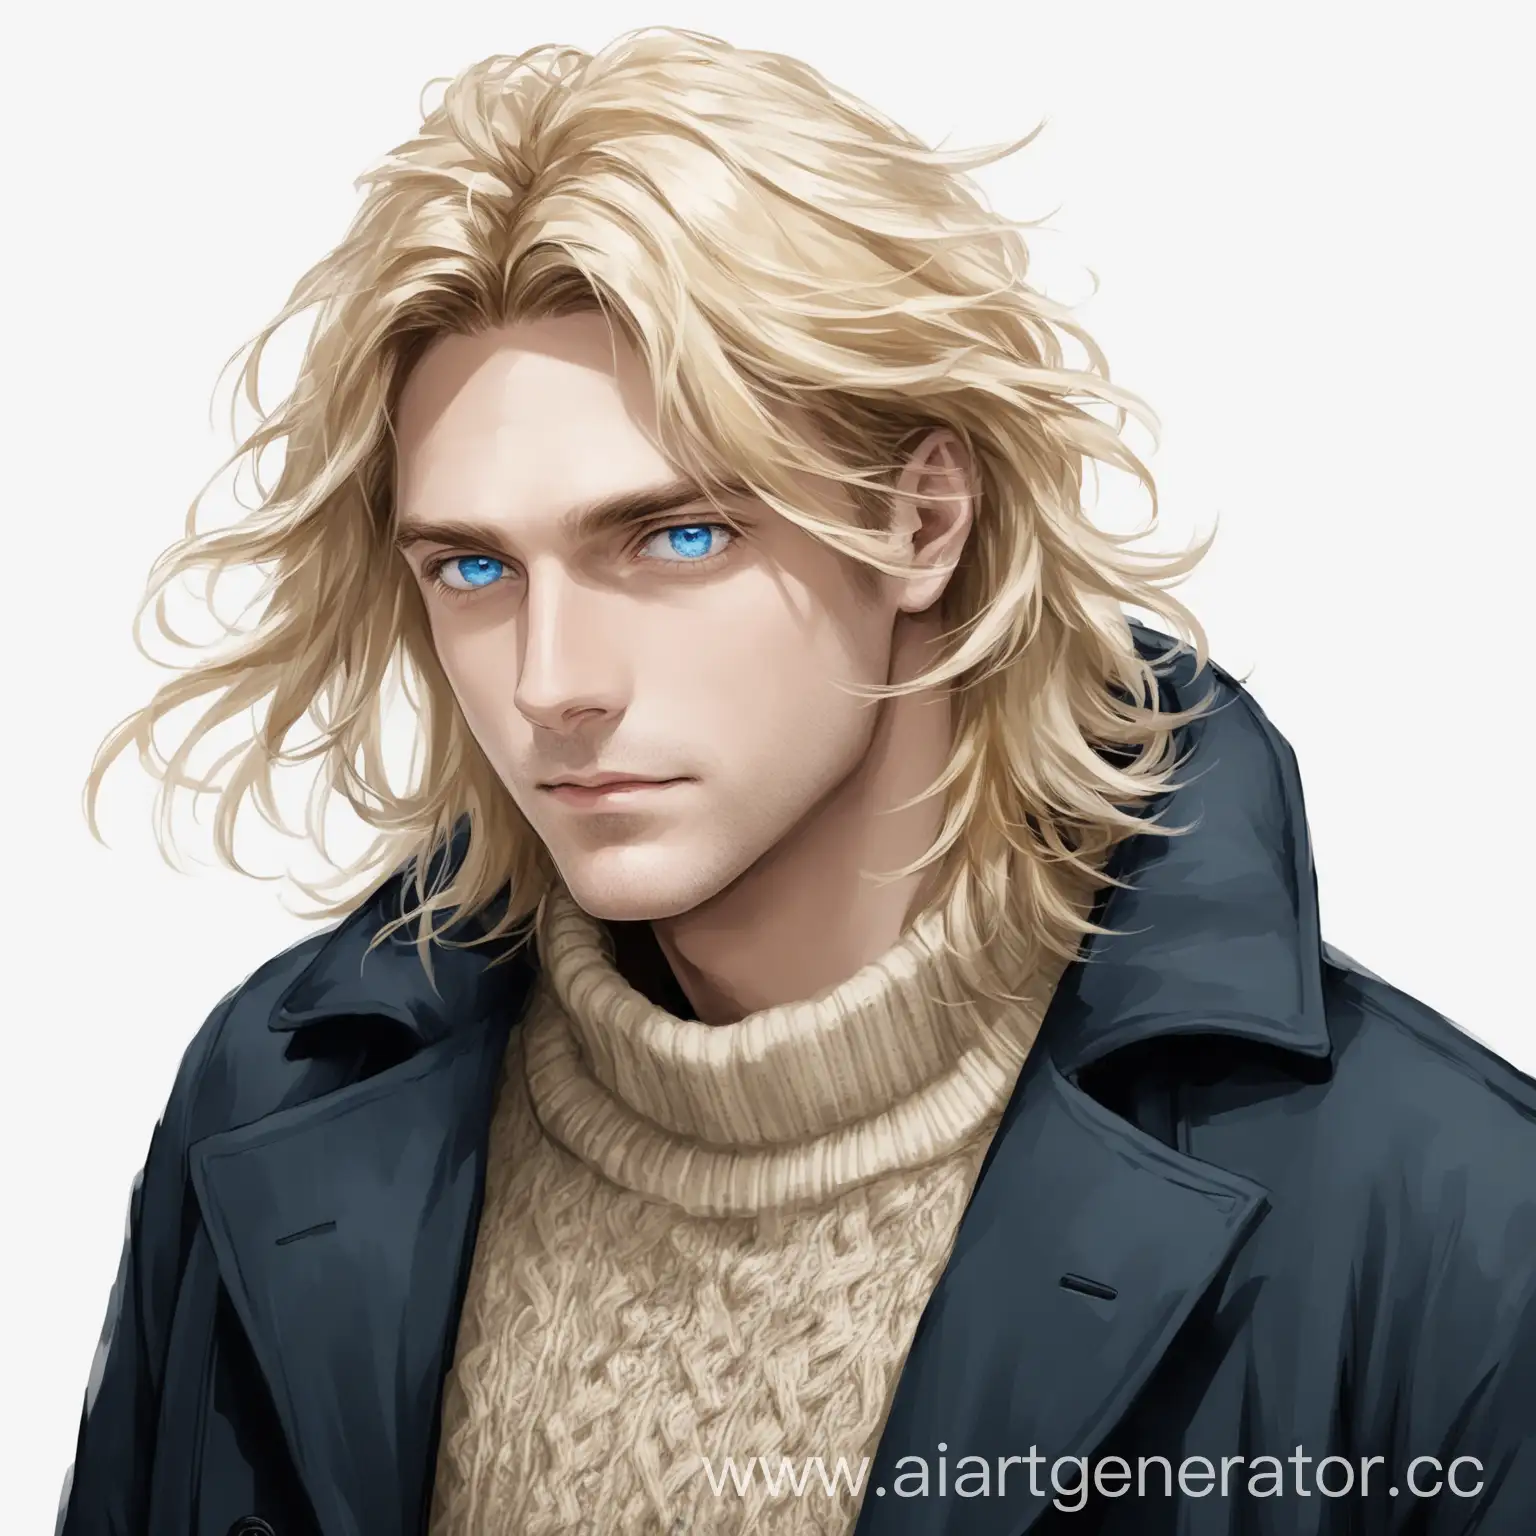 Blond-Man-with-Blue-Eyes-in-Casual-Attire-Against-White-Background